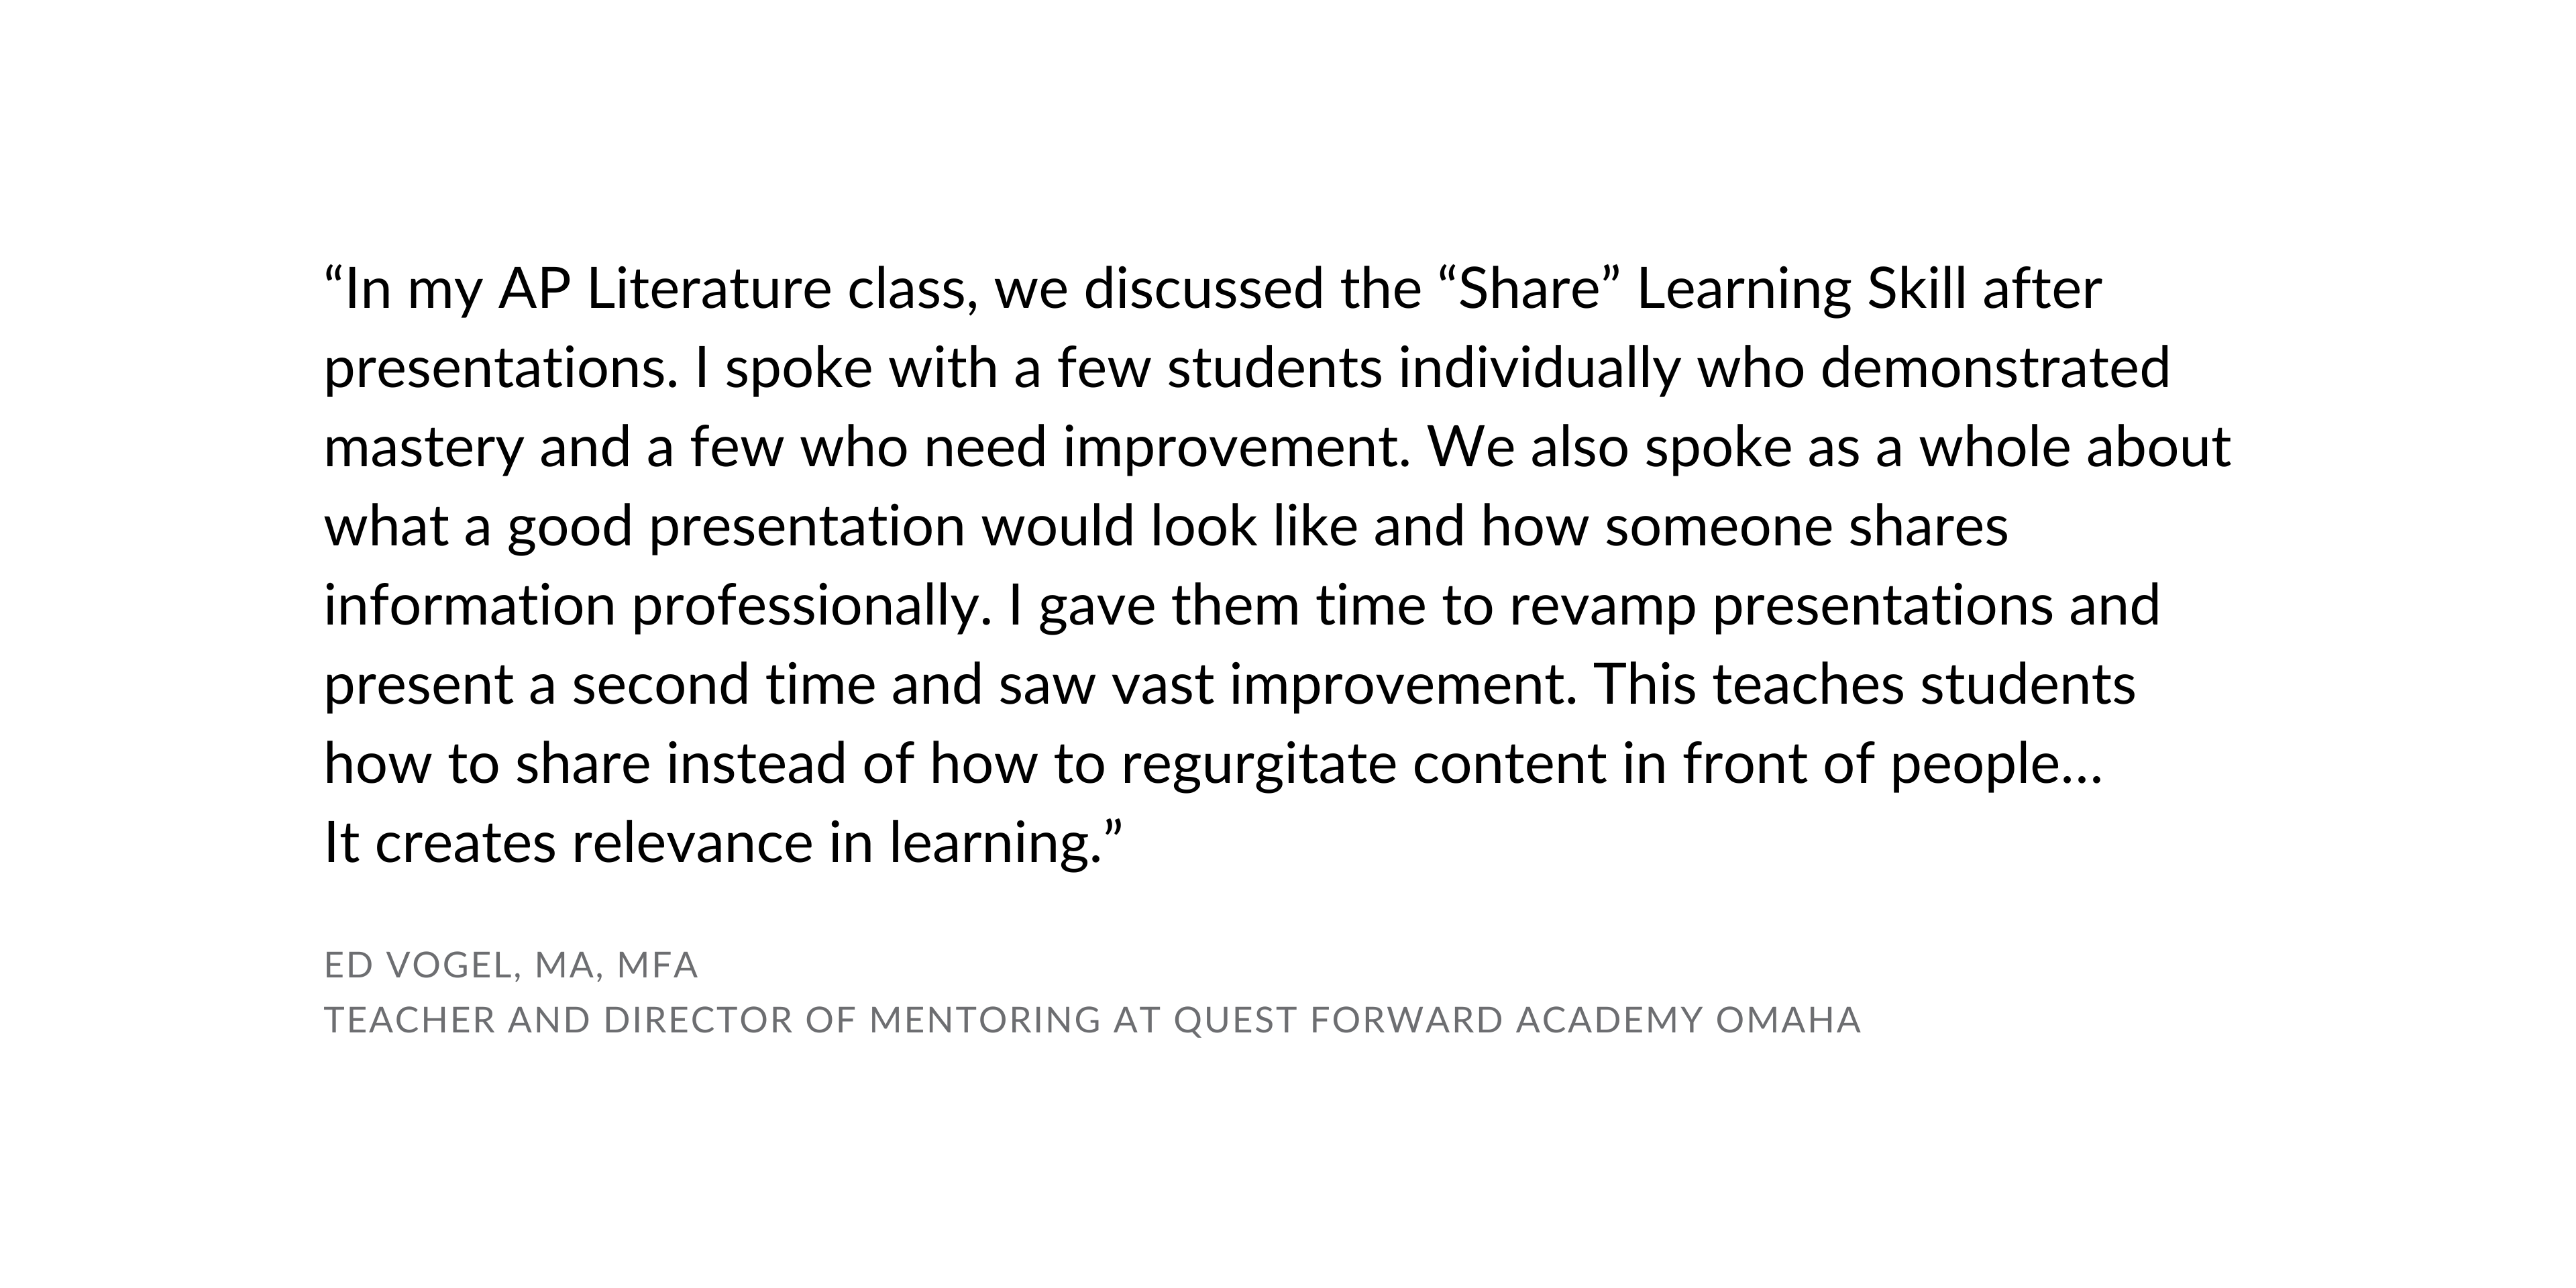 "In my AP Literature class, we discussed the "Share" Learning Skill after presentations. I spoke with a few students individually who demonstrated mastery and a few who need improvement. We also spoke as a whole about what a good presentation would look like and how someone shares information professionally. I gave them time to revamp presentations and present a second time and saw vast improvement. This teaches students how to share instead of how to regurgitate content in front of people... It creates relevance in learning." Ed Vogel Teacher and Director of Mentoring at Quest Forward Academy Omaha